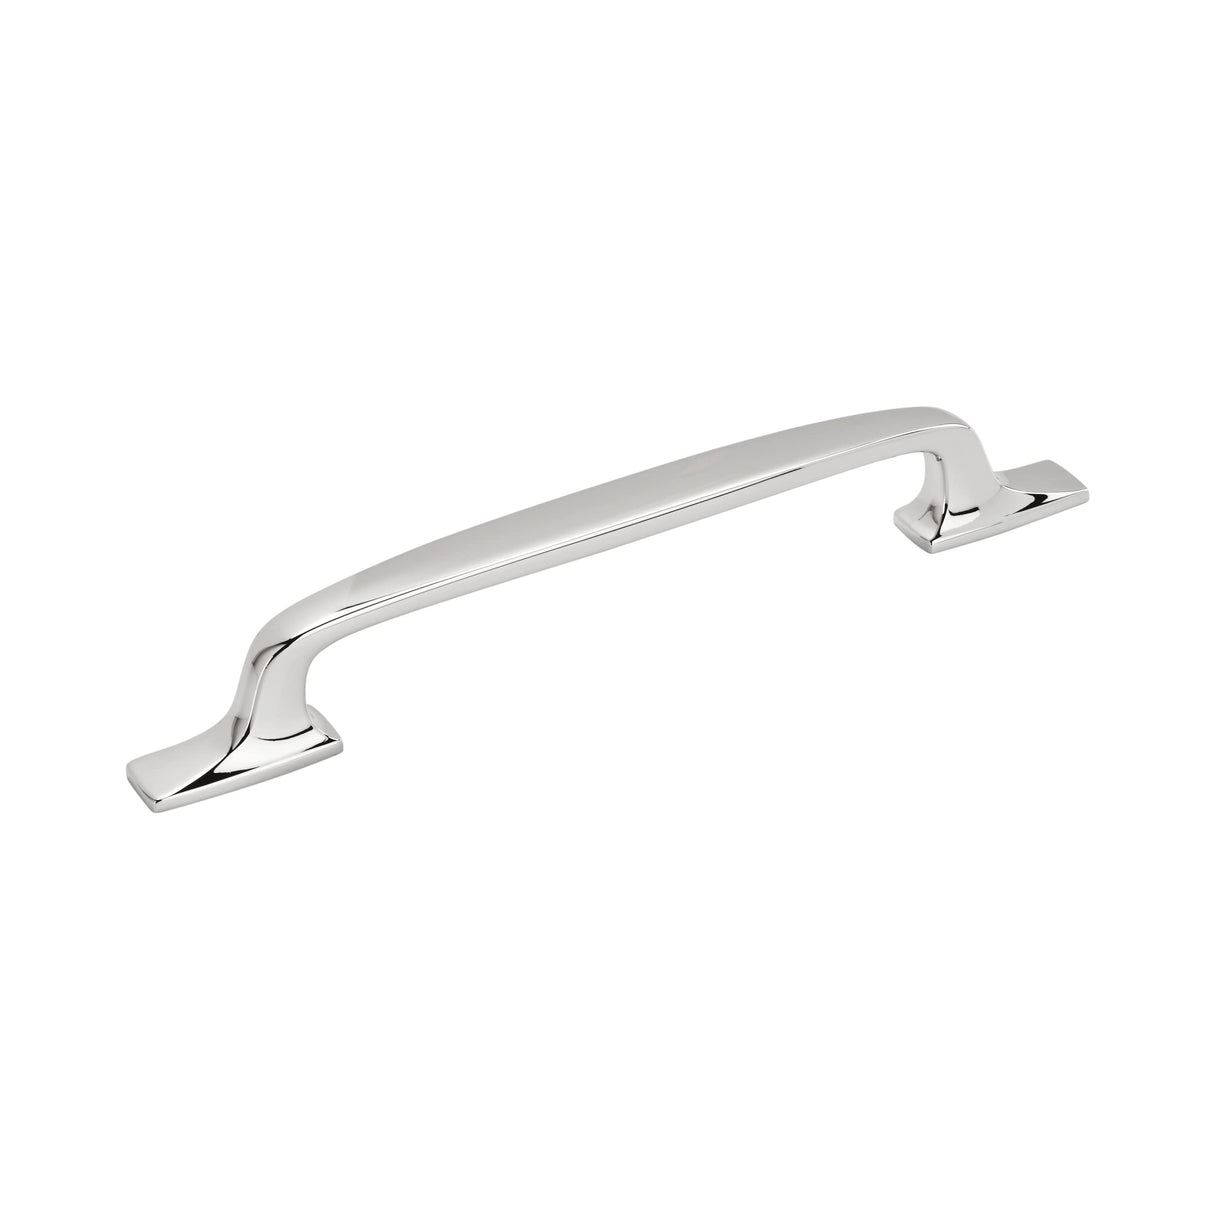 Amerock Cabinet Pull Polished Chrome 6-5/16 inch (160 mm) Center to Center Highland Ridge 1 Pack Drawer Pull Drawer Handle Cabinet Hardware